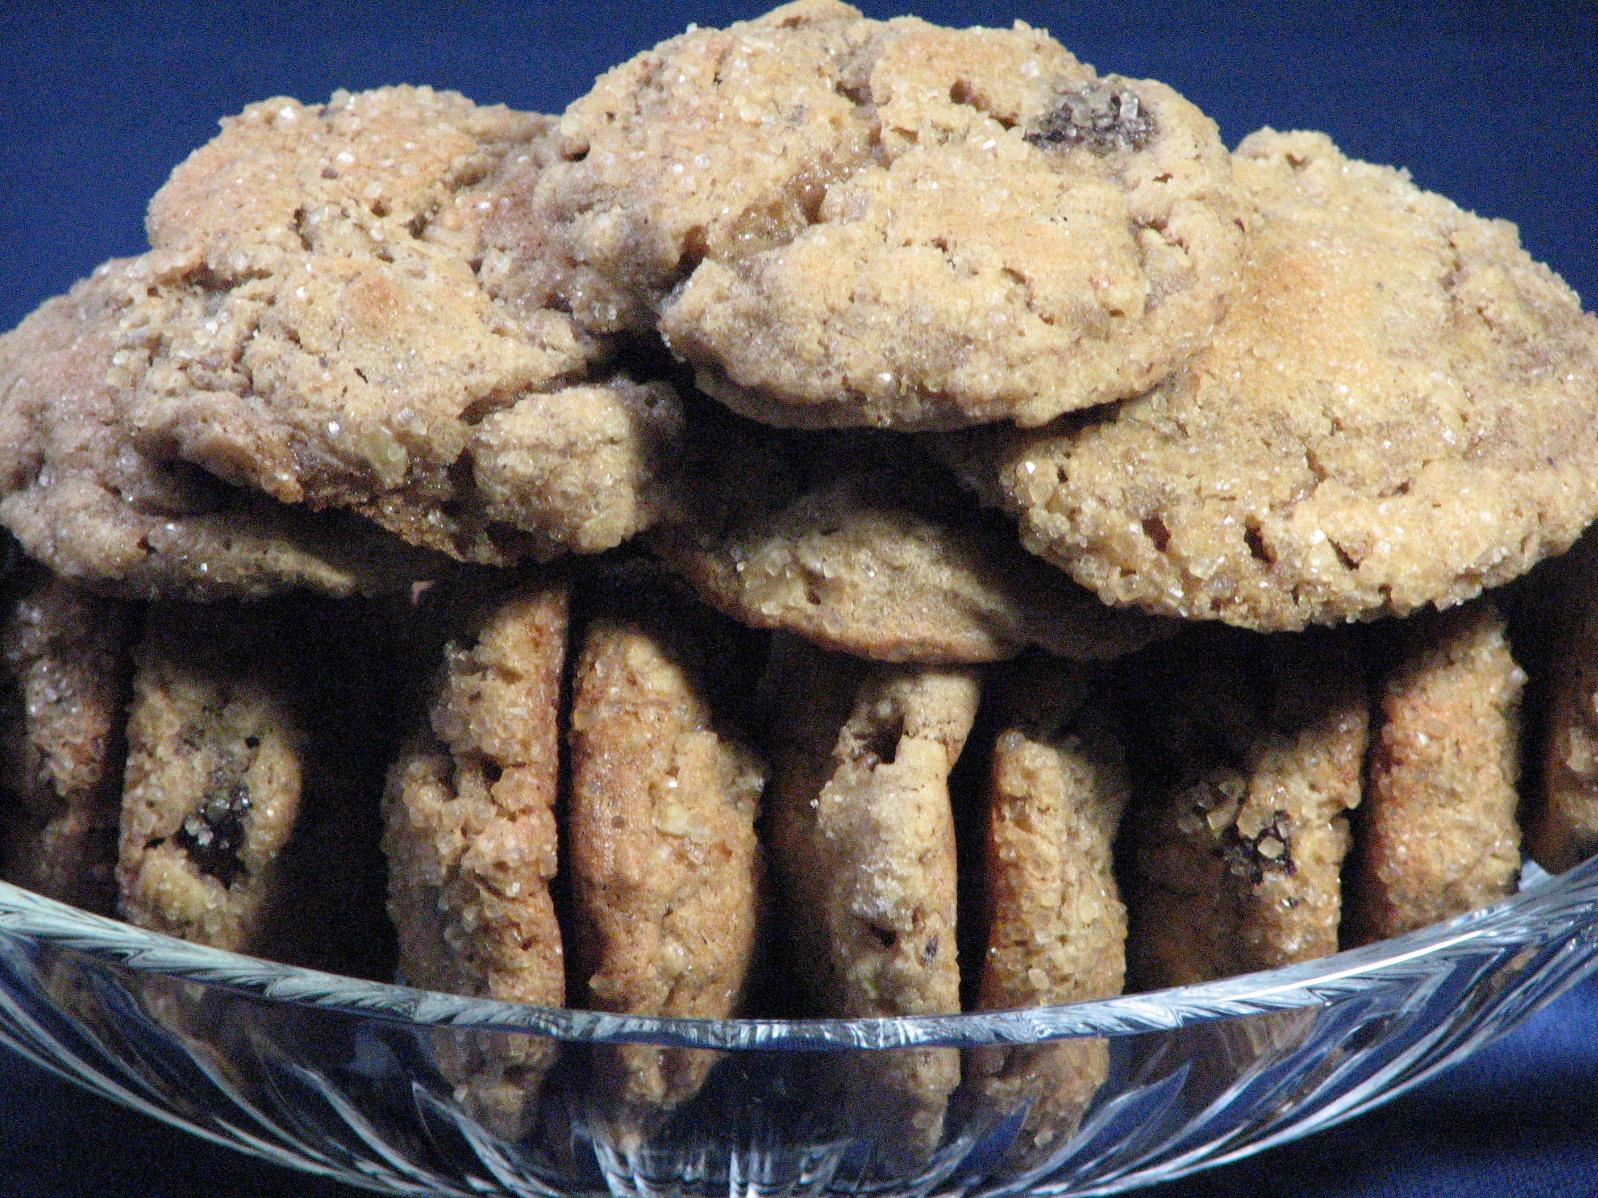  These oatmeal raisin cookies are simply irresistible!